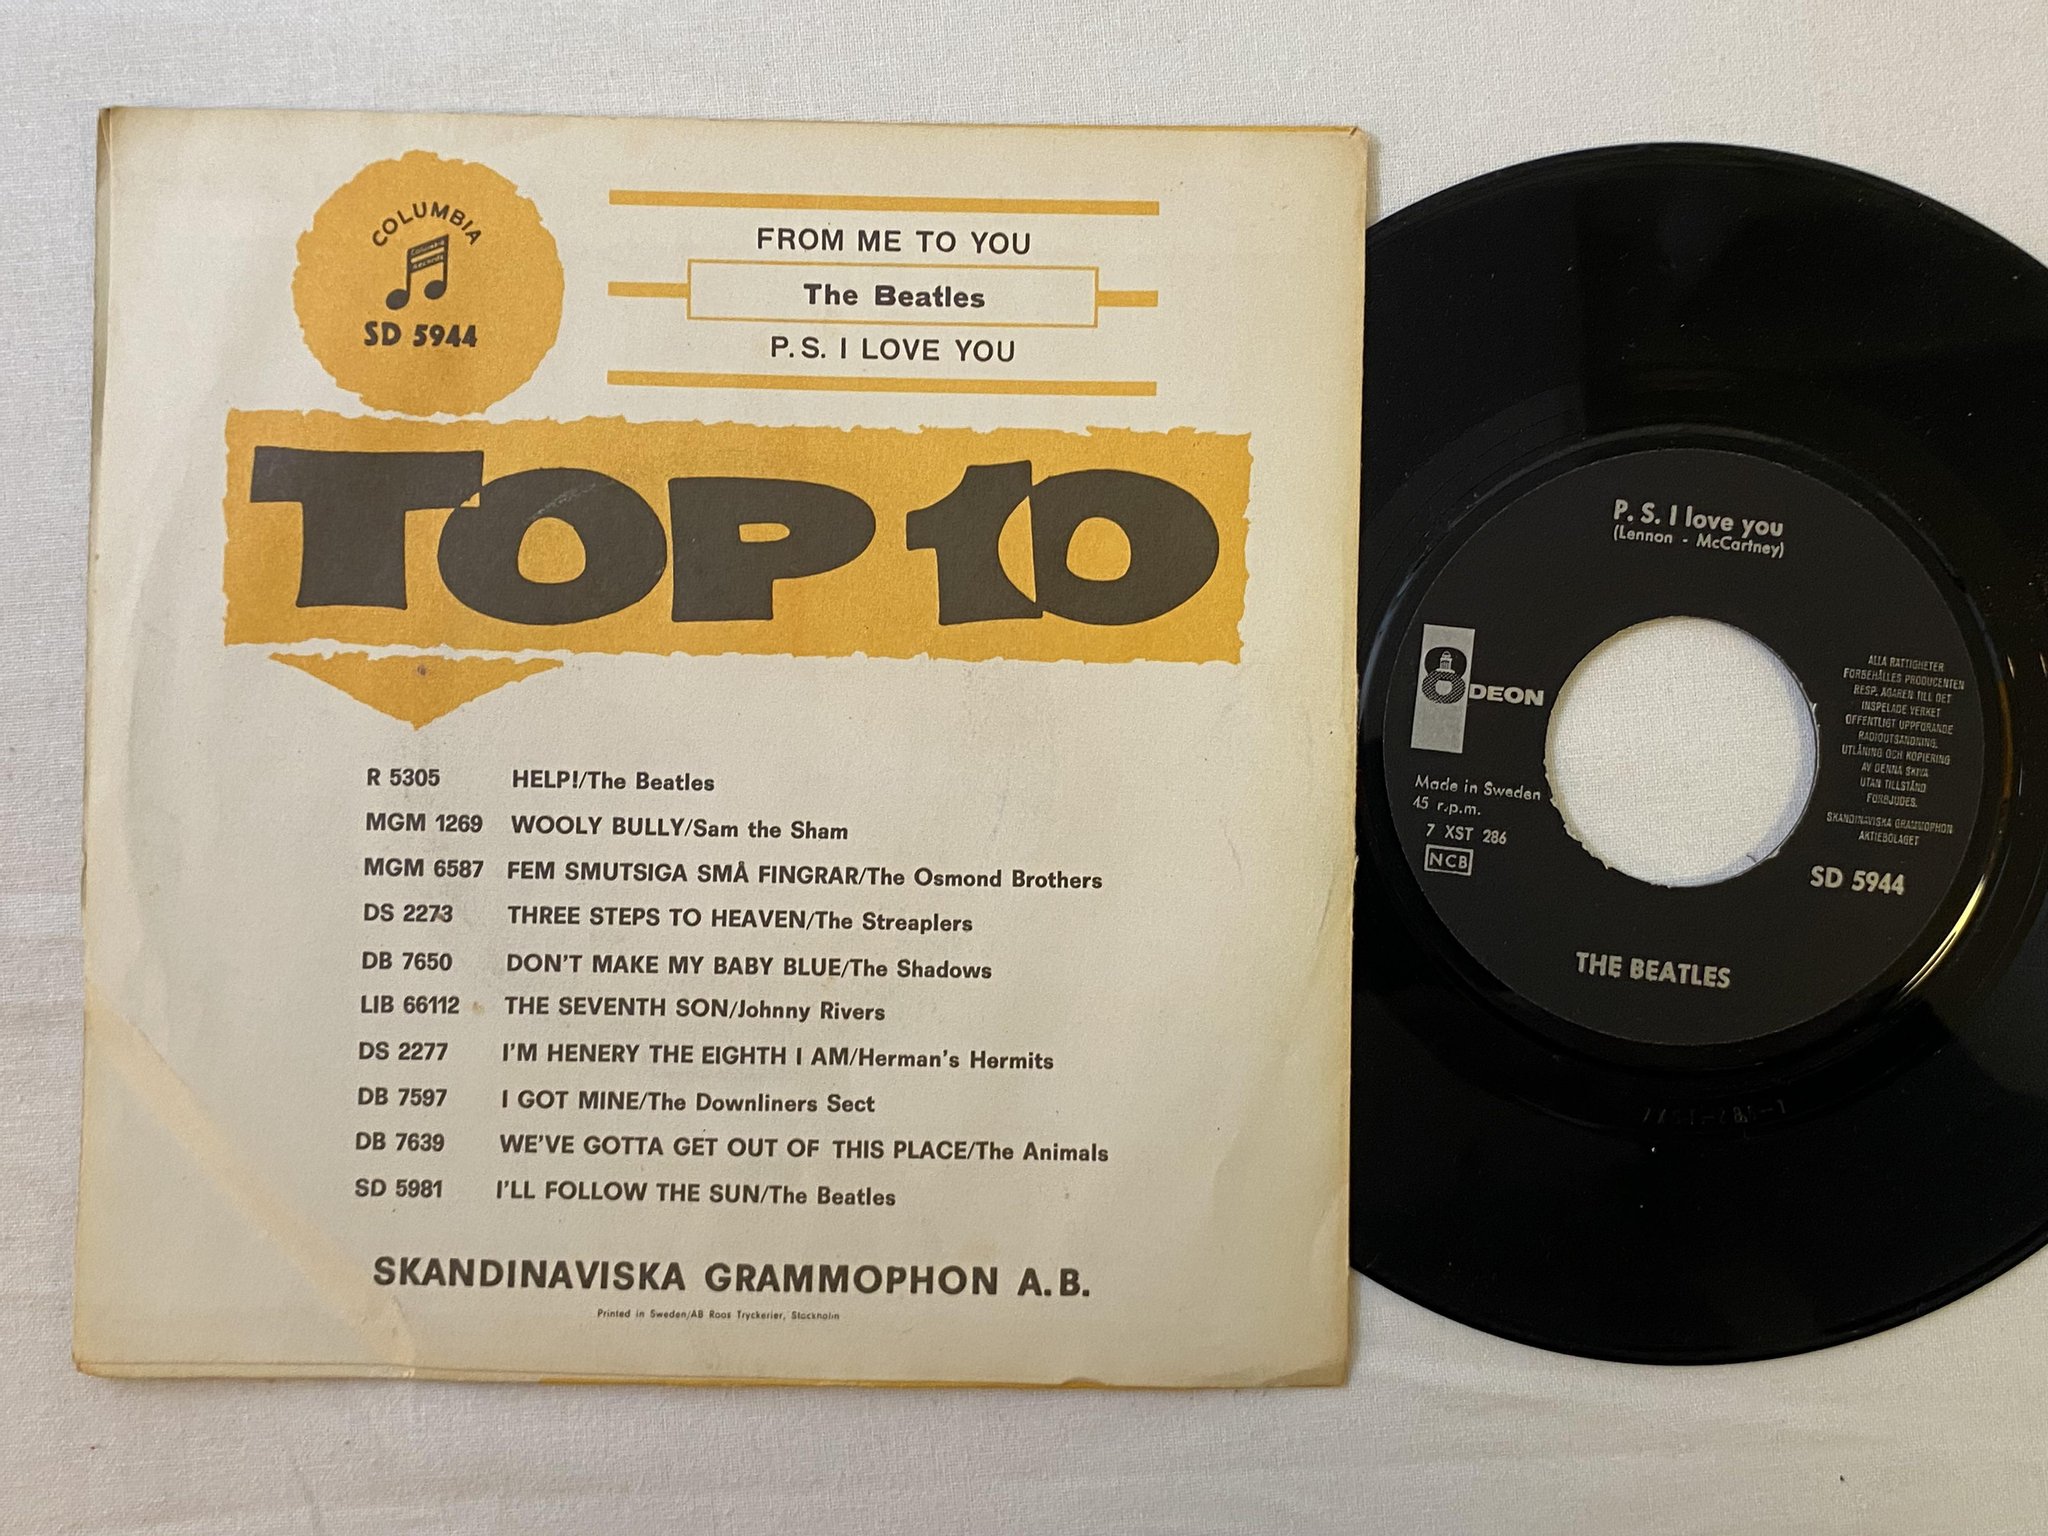 Omslagsbild för skivan THE BEATLES from me to you 7" -64 Swe ODEON SD 5944 *** large cebtre hole ***